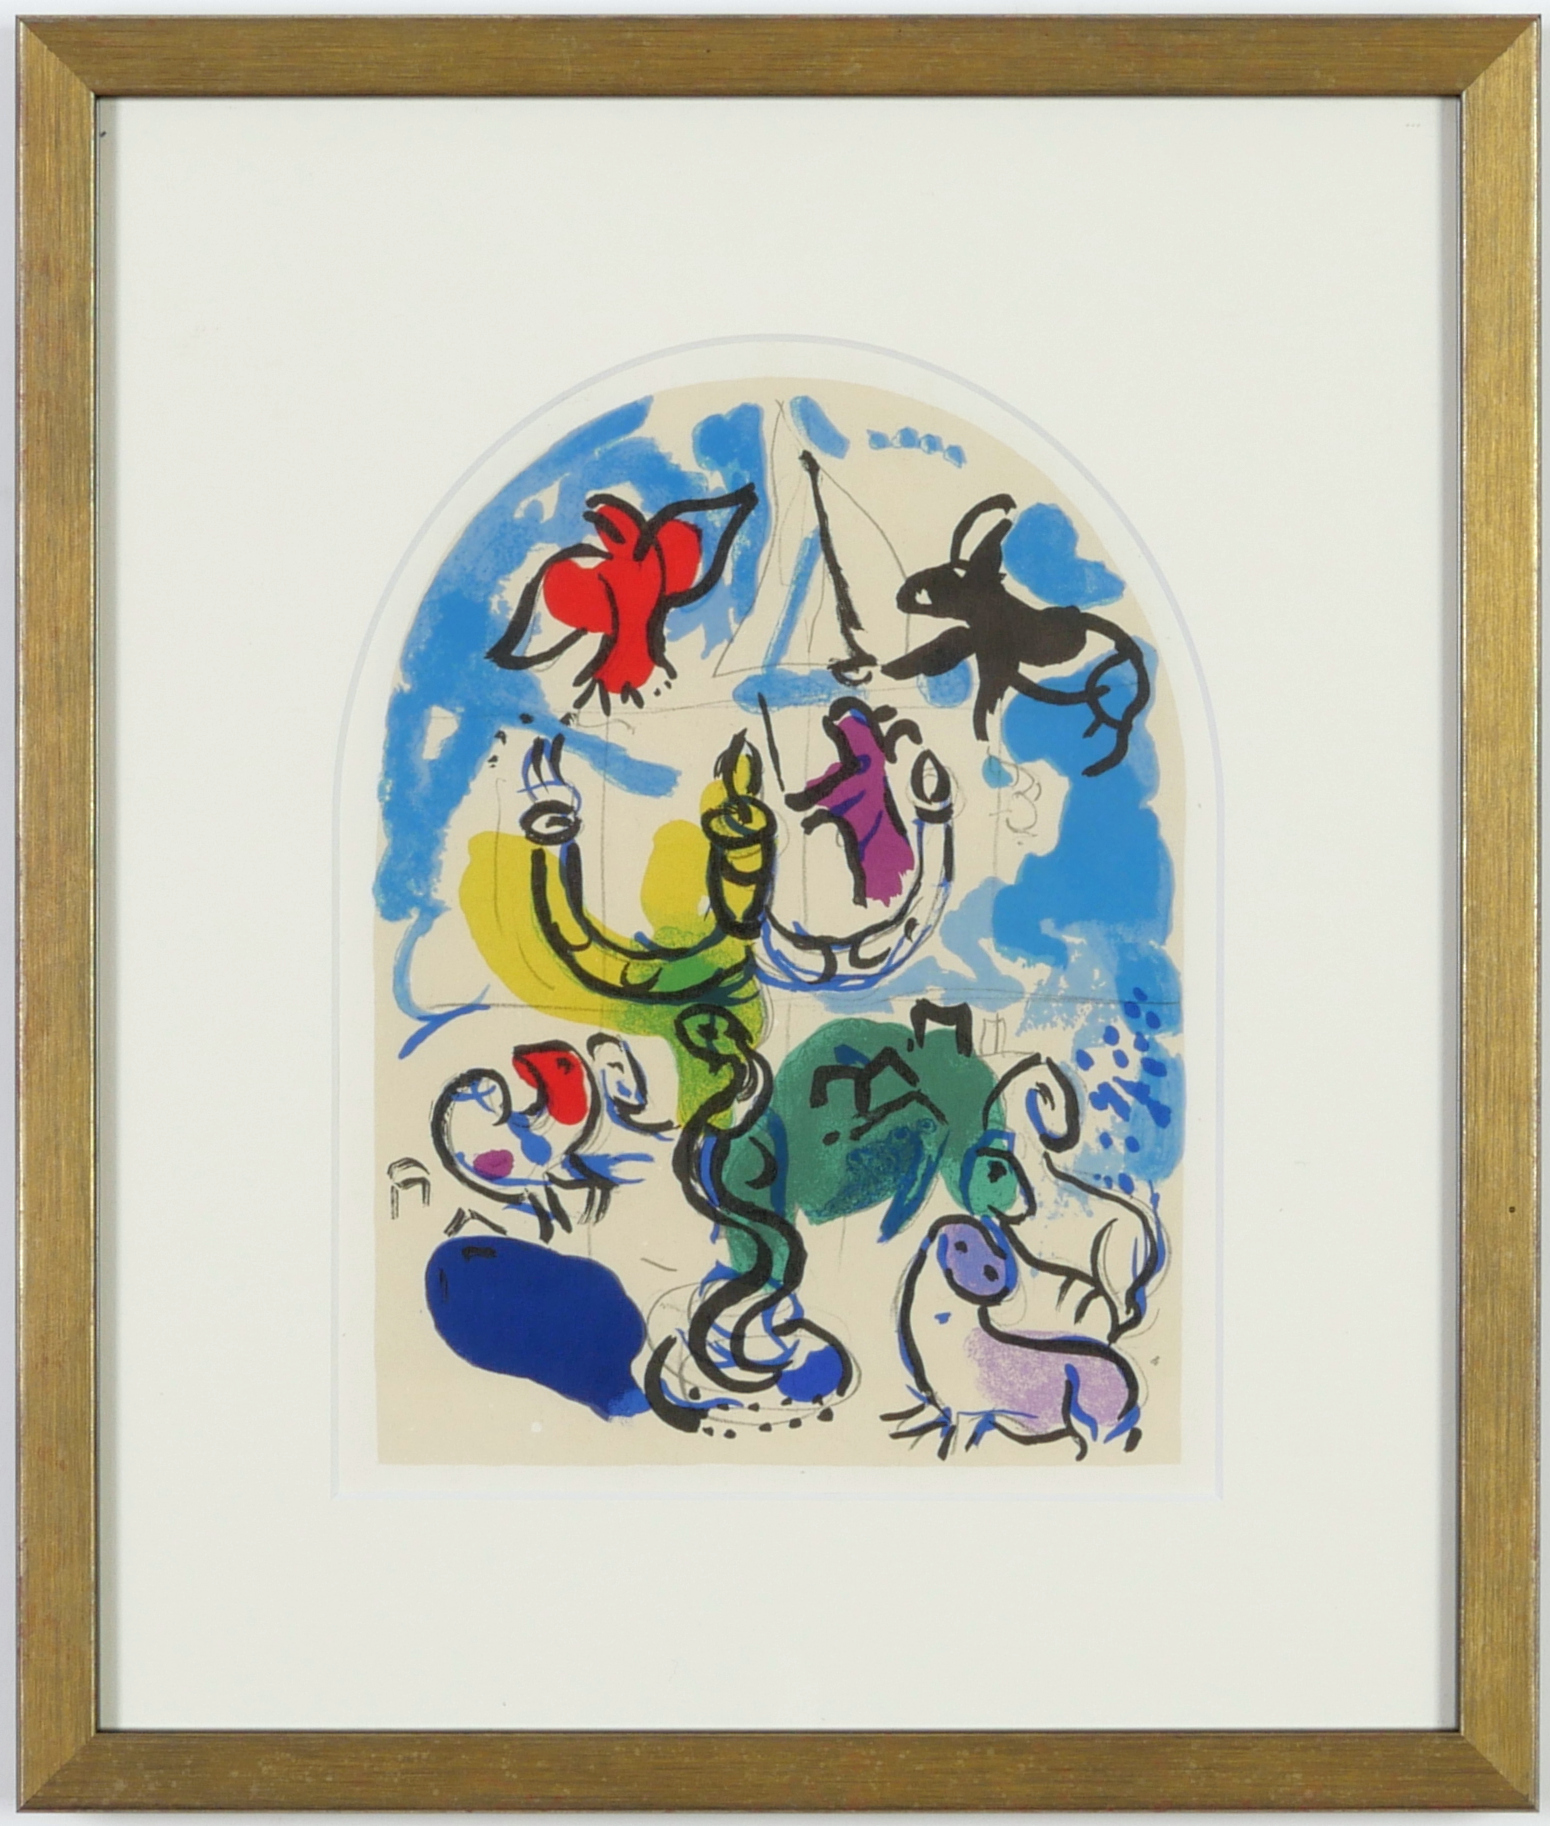 MARC CHAGALL, The Twelve Tribes, twelve lithographs in colour, printed in Paris by Mourlot 1962, - Image 8 of 13